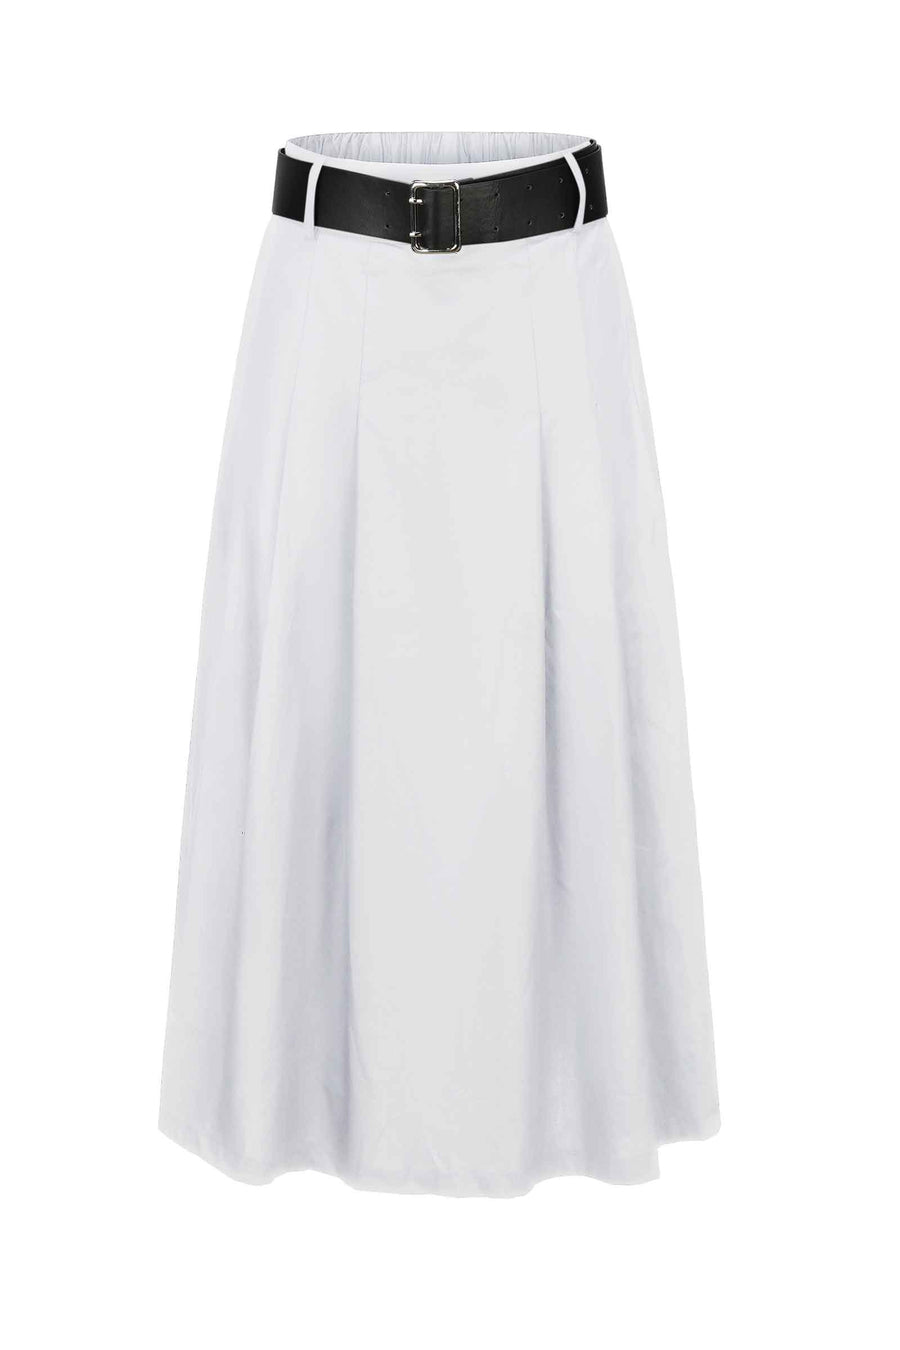 Darcy Belted Skirt - White